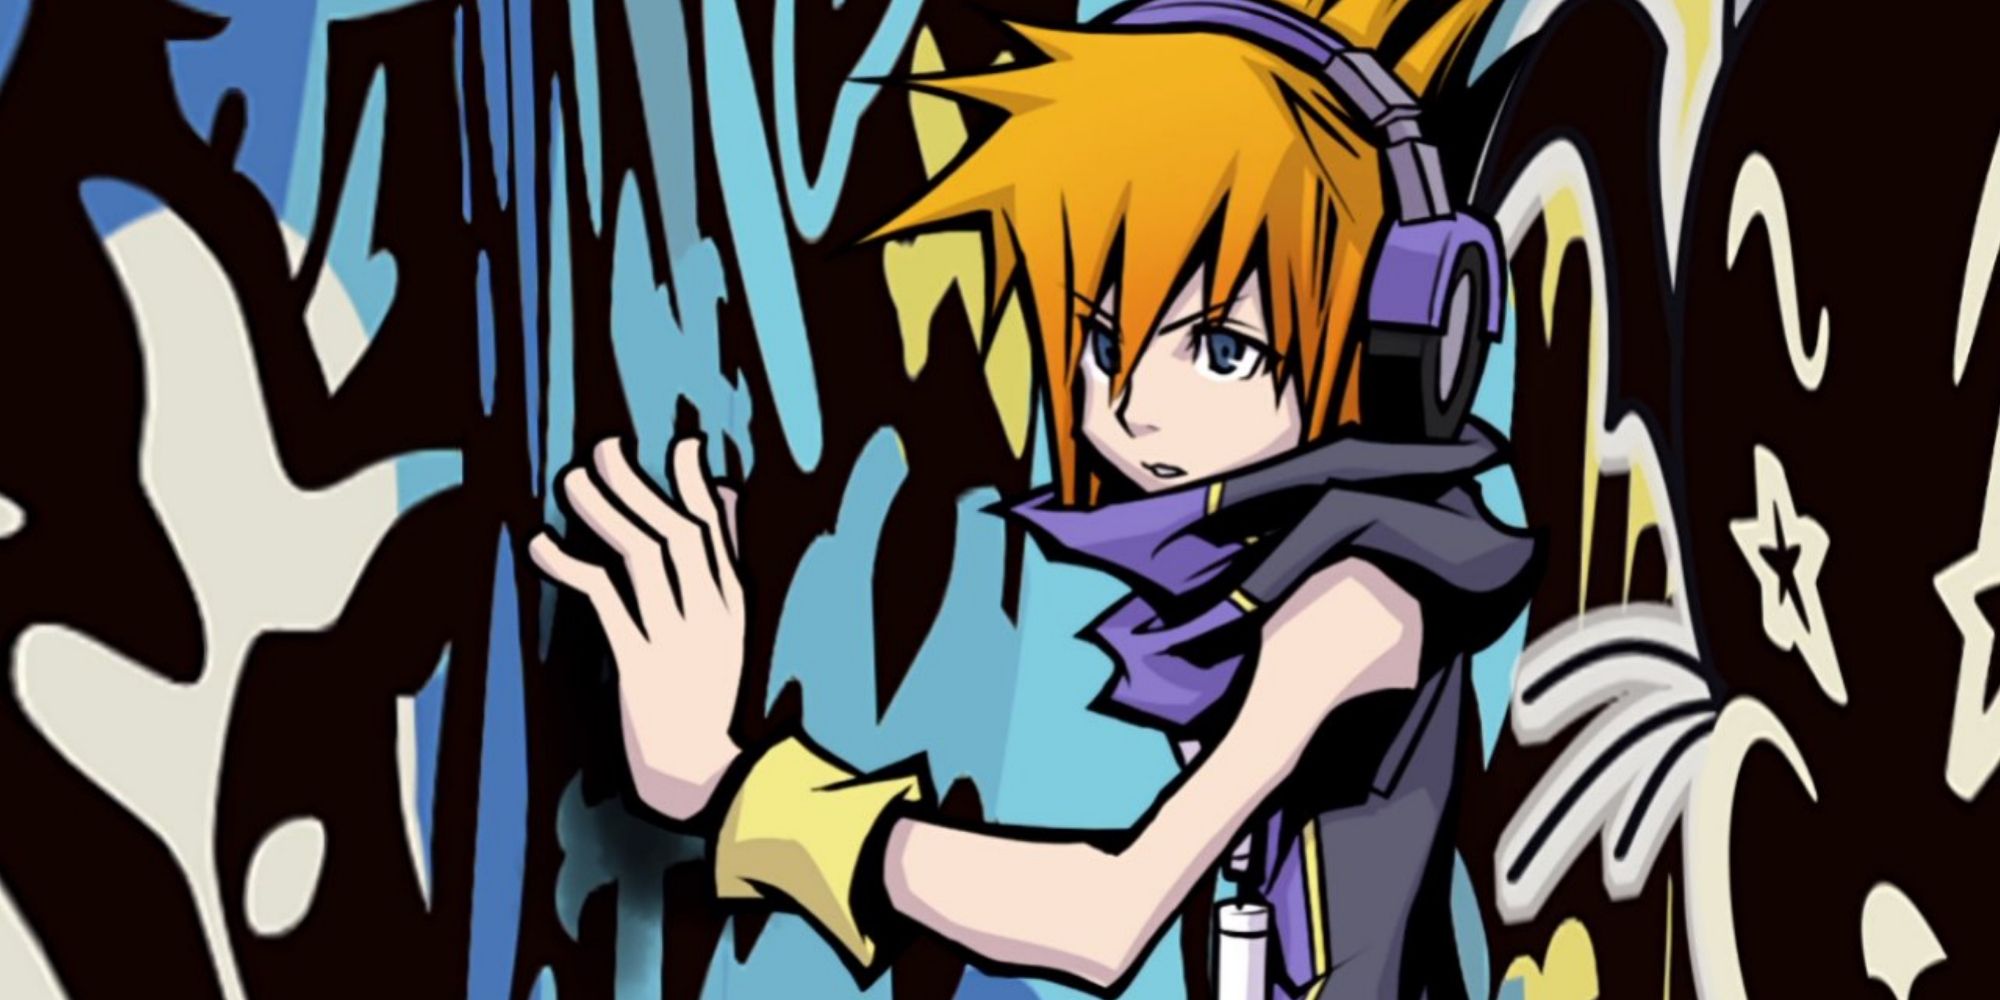 Neku with his hand on CAT wall art in The World Ends With You